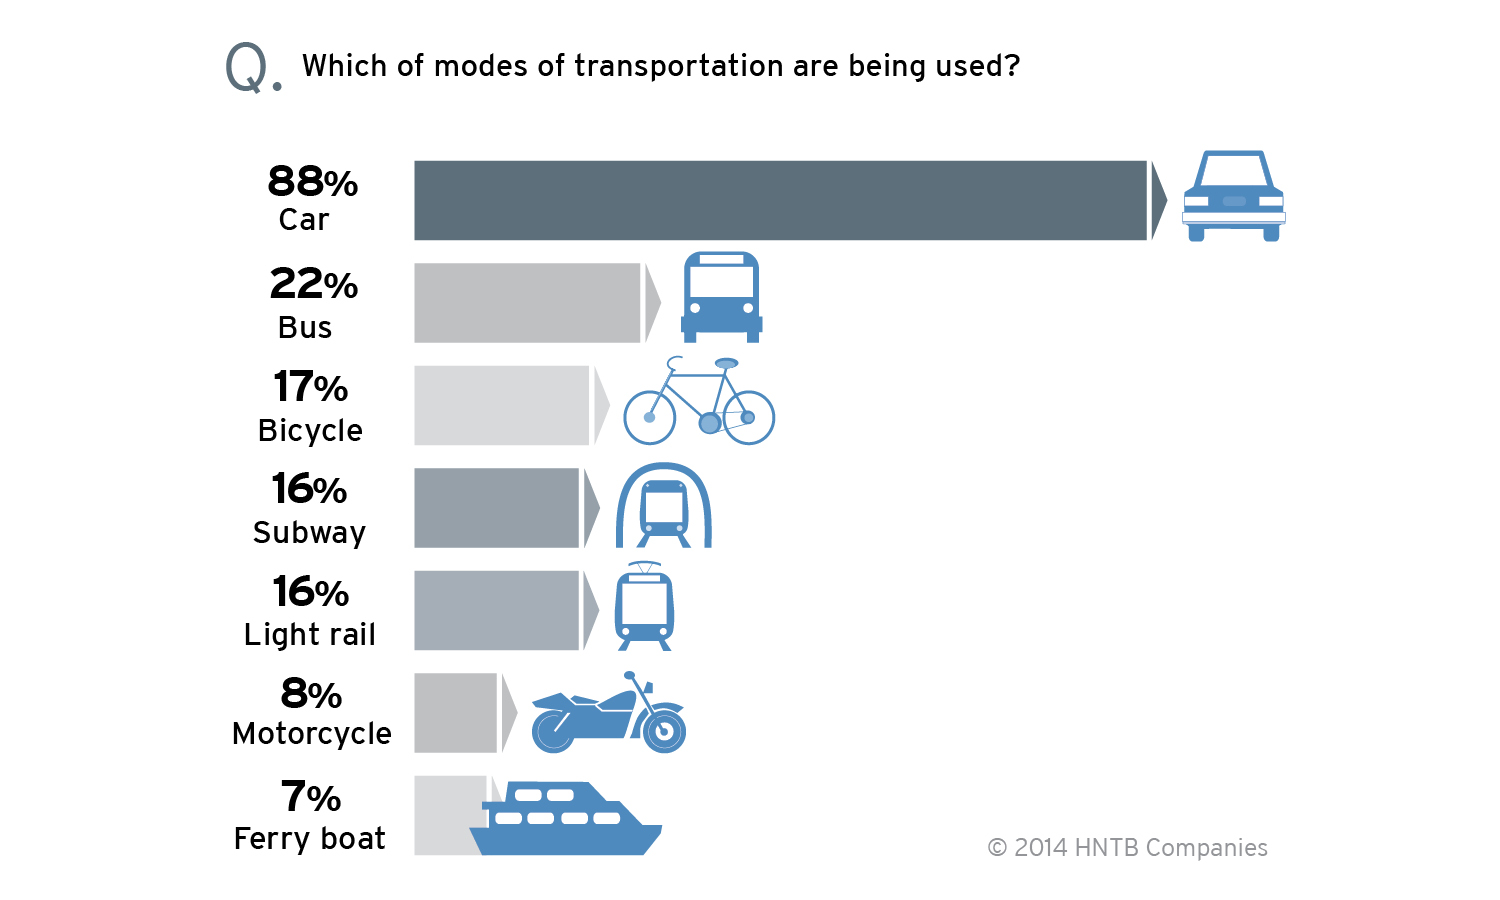 Nearly 9 in 10 (88 percent) Americans travel by car, with less than 1 in 4 (22 percent) riding public buses and even fewer on subways (16 percent), light rail (16 percent) or bicycles (17 percent).